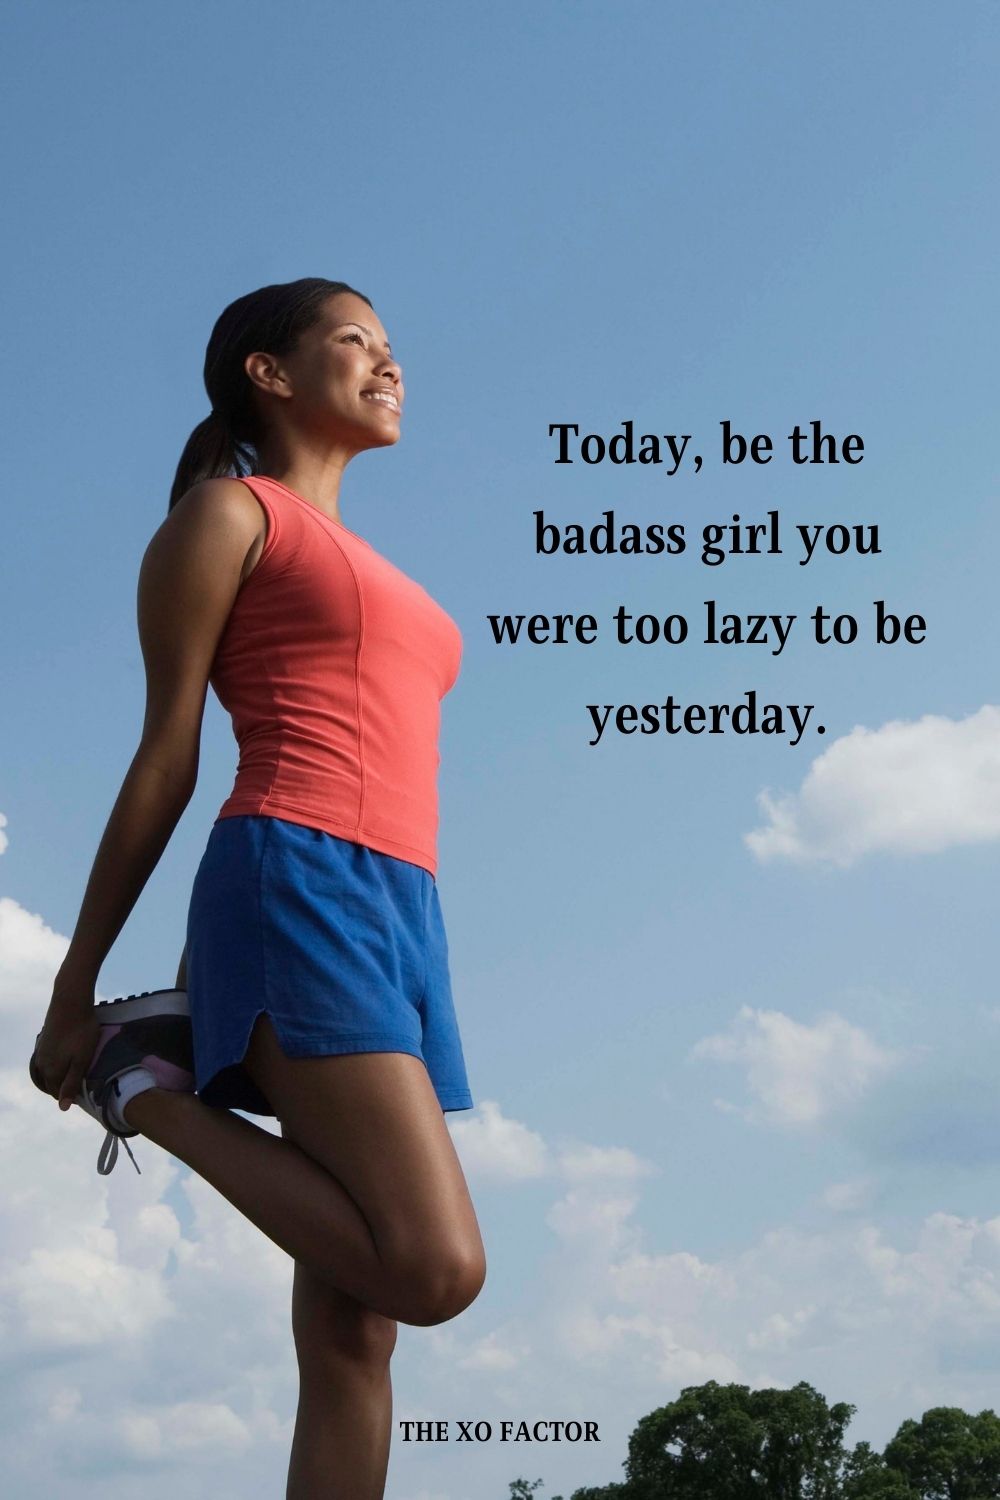 Today, be the badass girl you were too lazy to be yesterday.